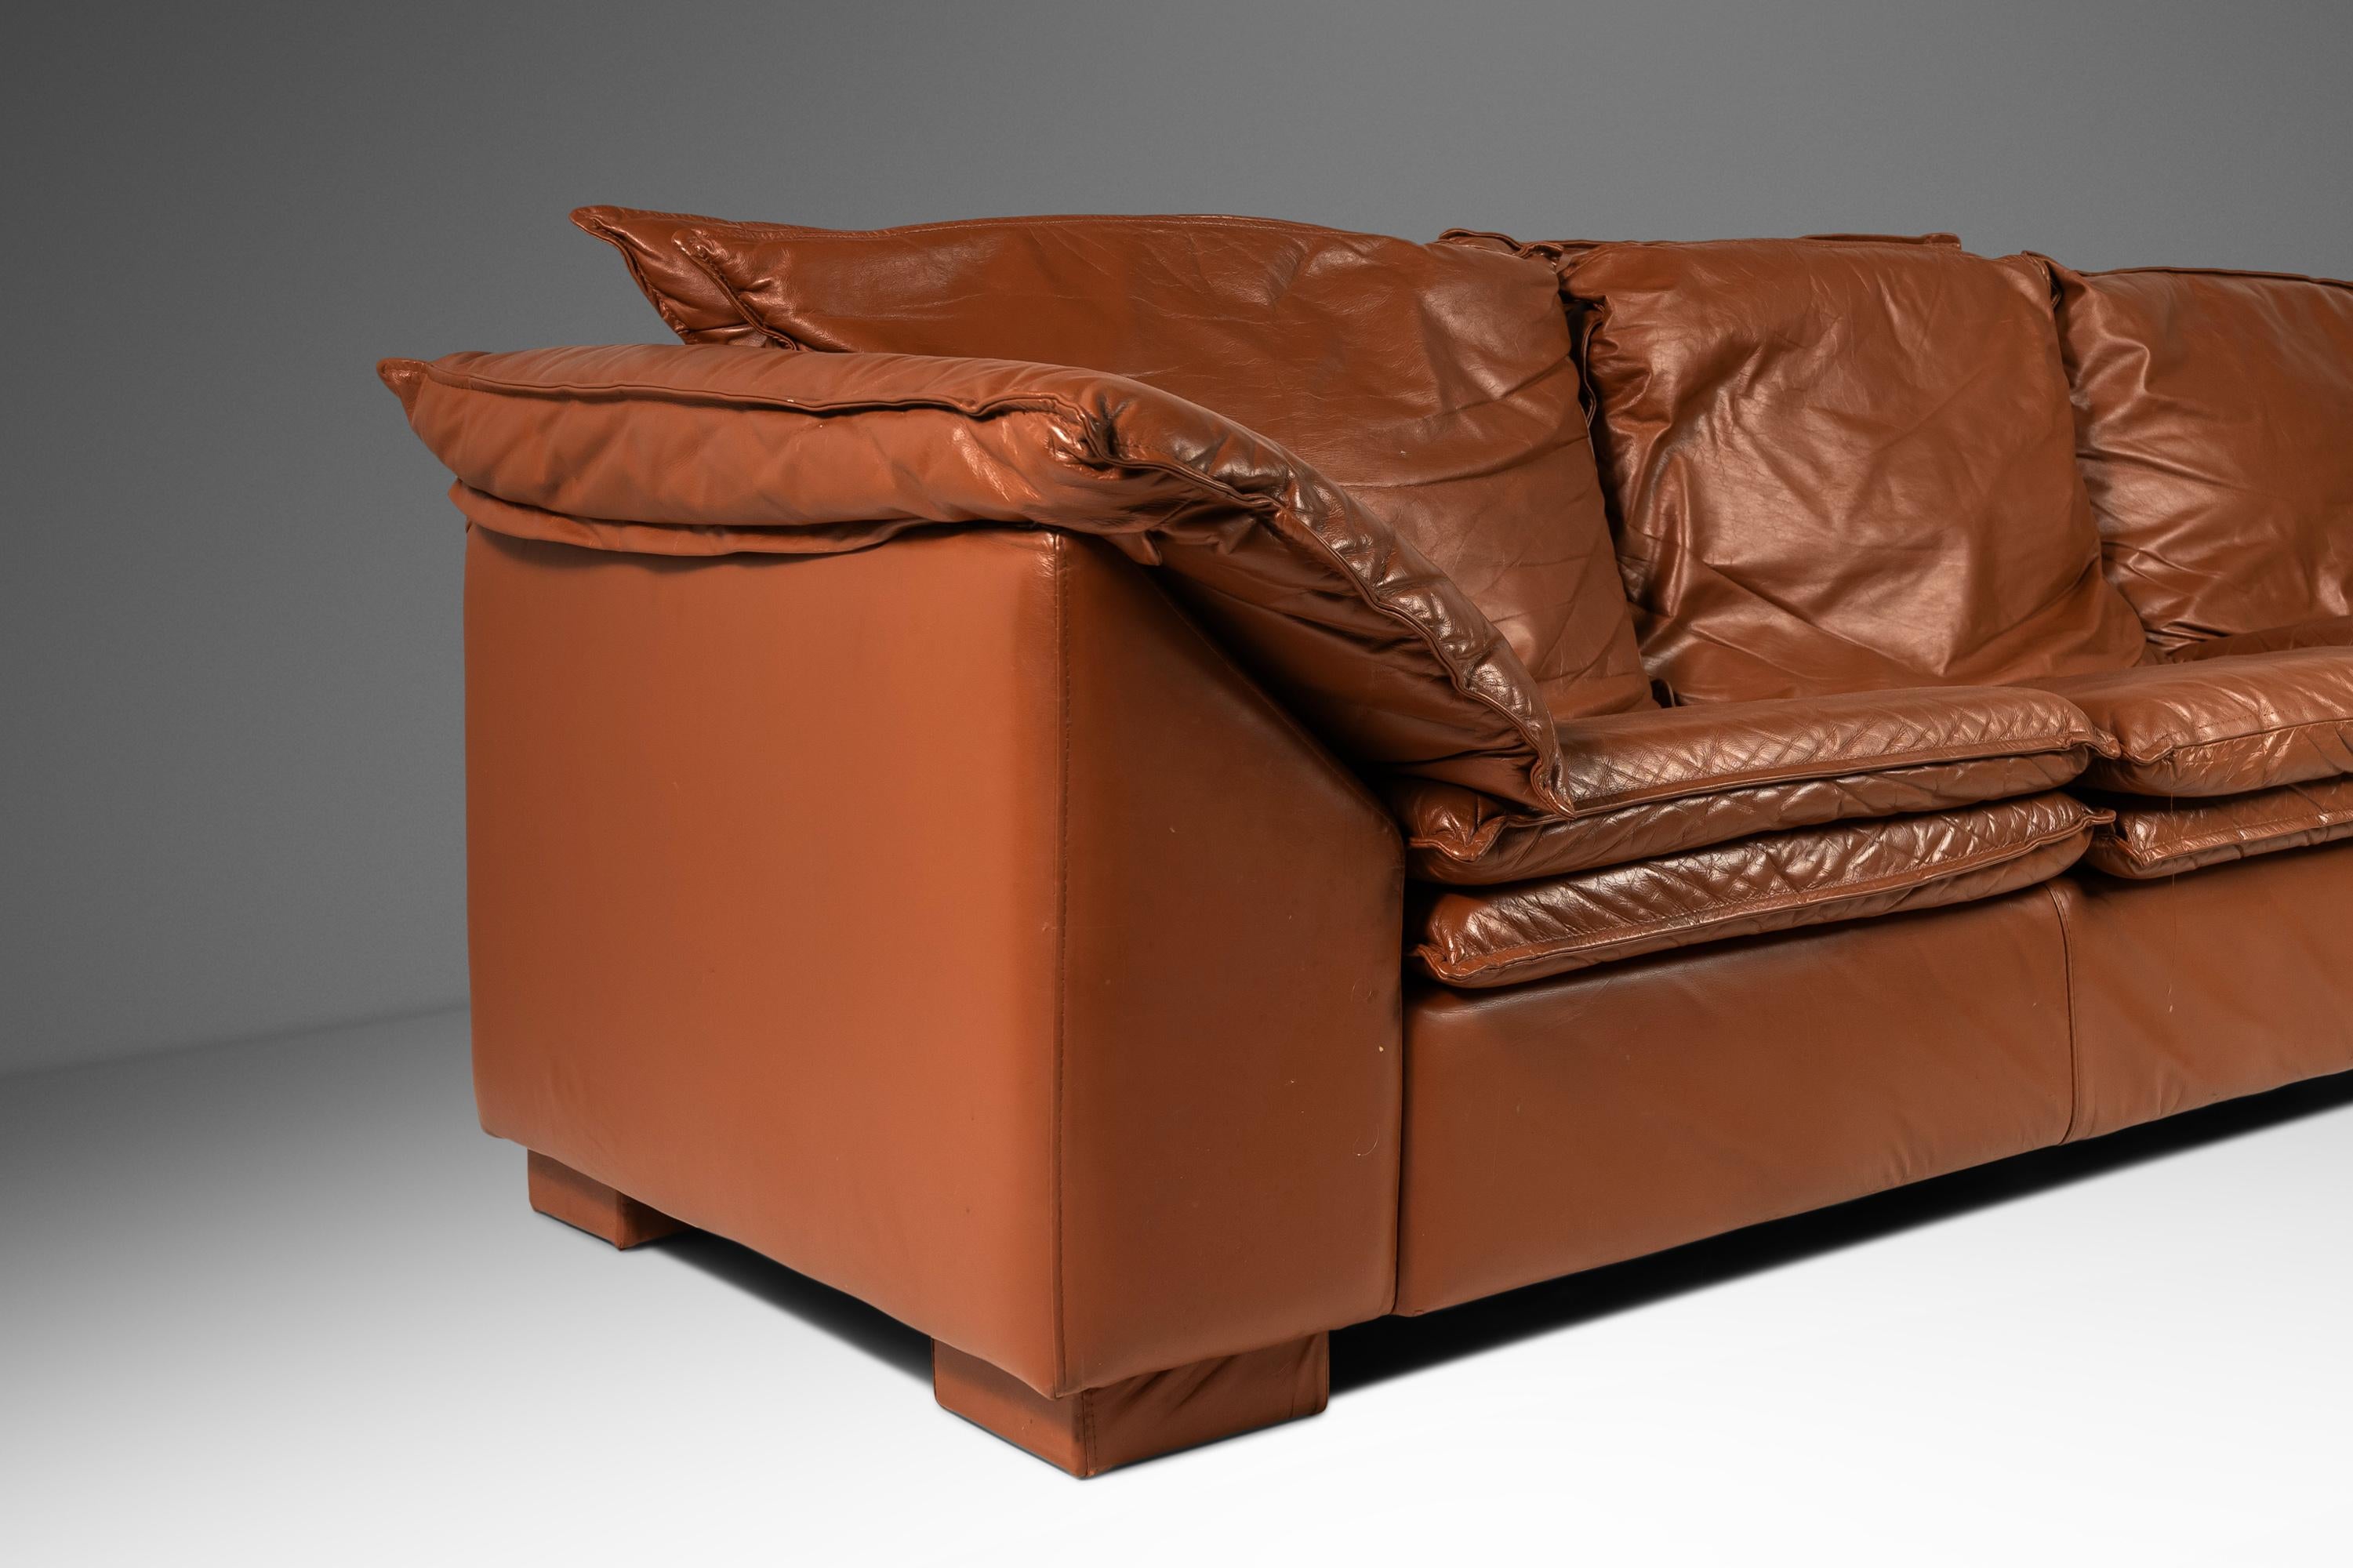 Low Profile Sofa in Cognac Brown Leather in the Manner of Niels Eilersen, 1980's For Sale 11